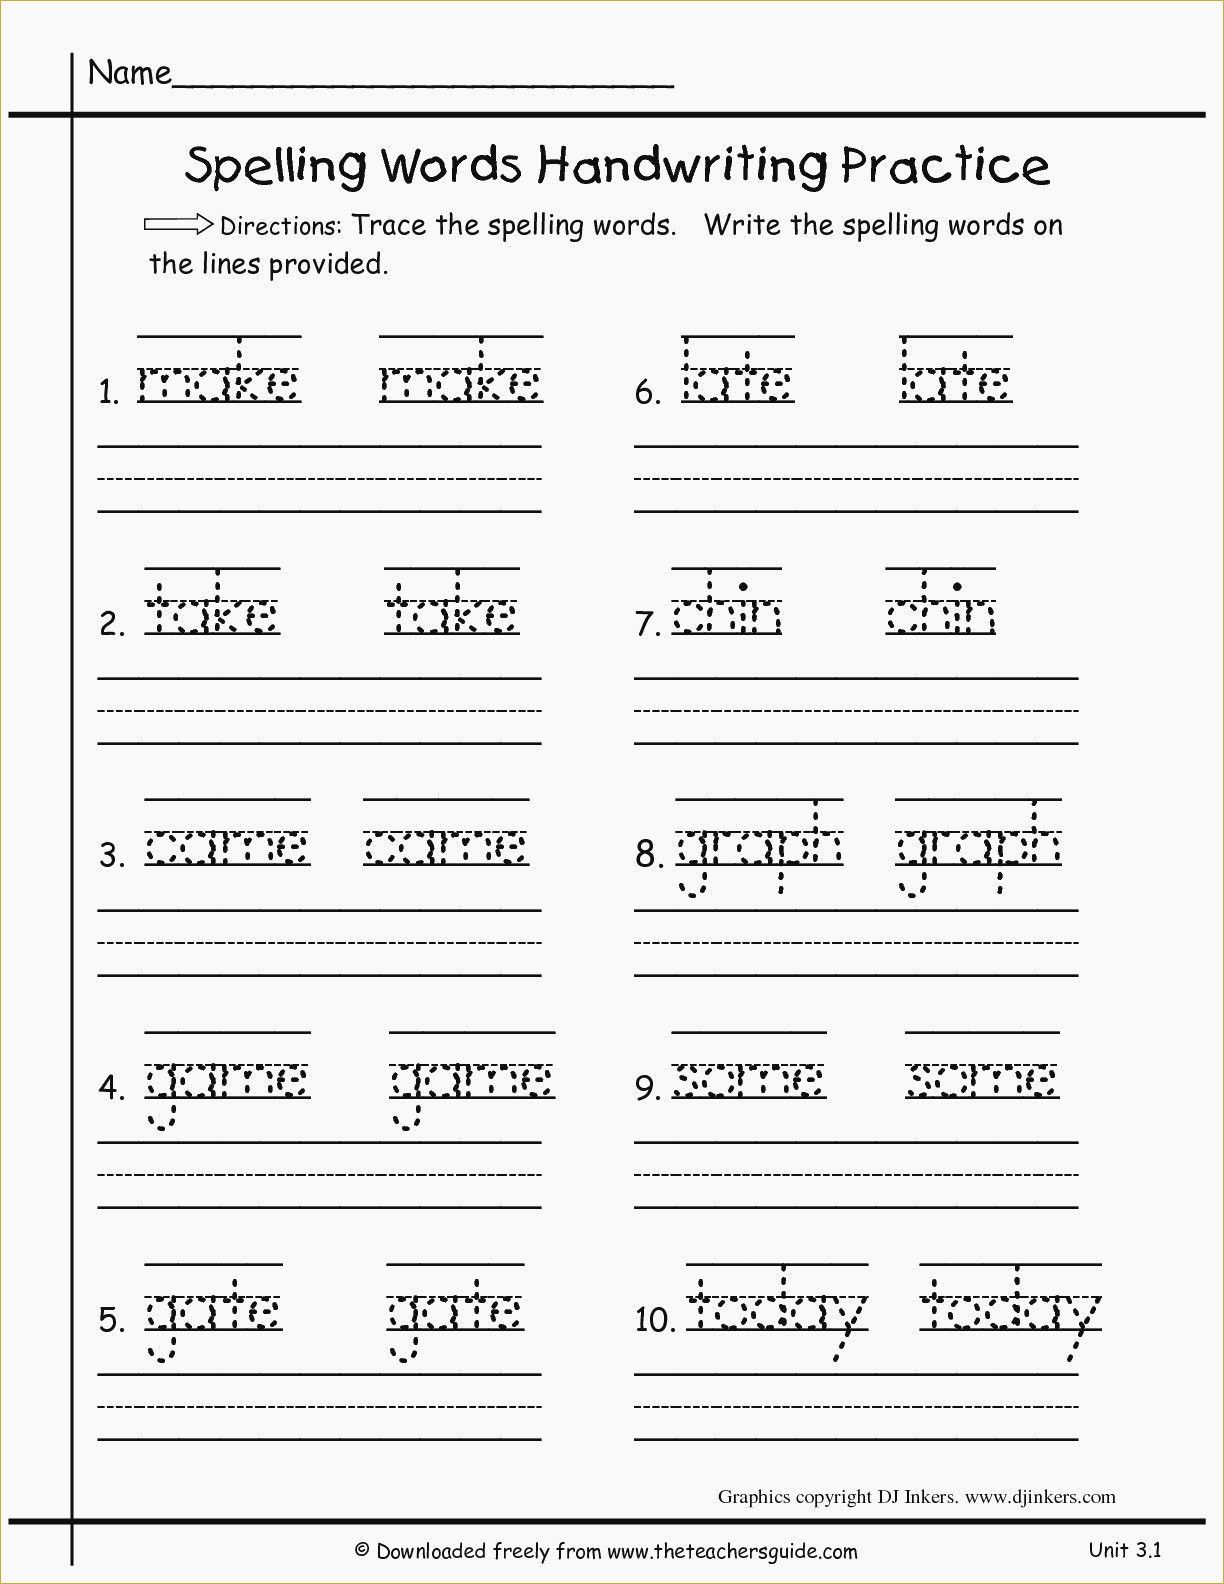 1St Grade Writing Worksheets In 2020 | Writing Practice intended for Alphabet Writing Worksheets For 1St Grade